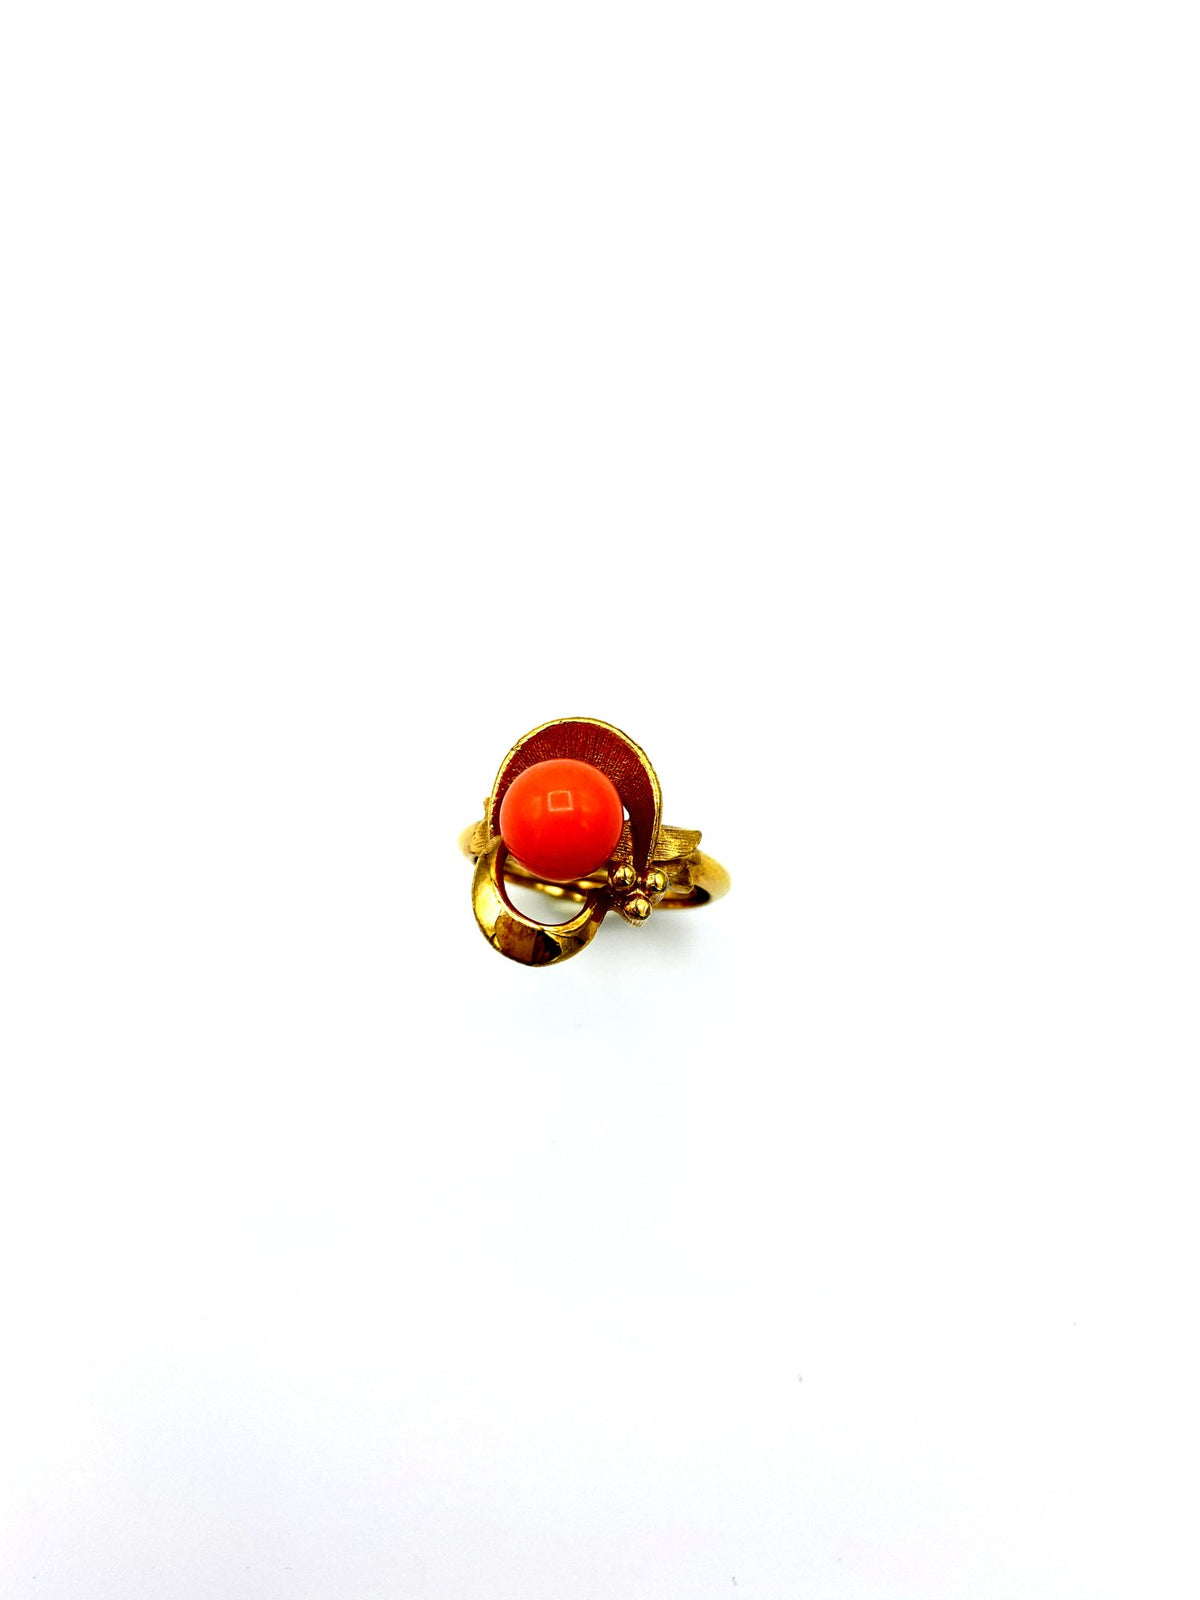 Avon Coral Floral Vintage Adjustable Cocktail Ring - 24 Wishes Vintage Jewelry